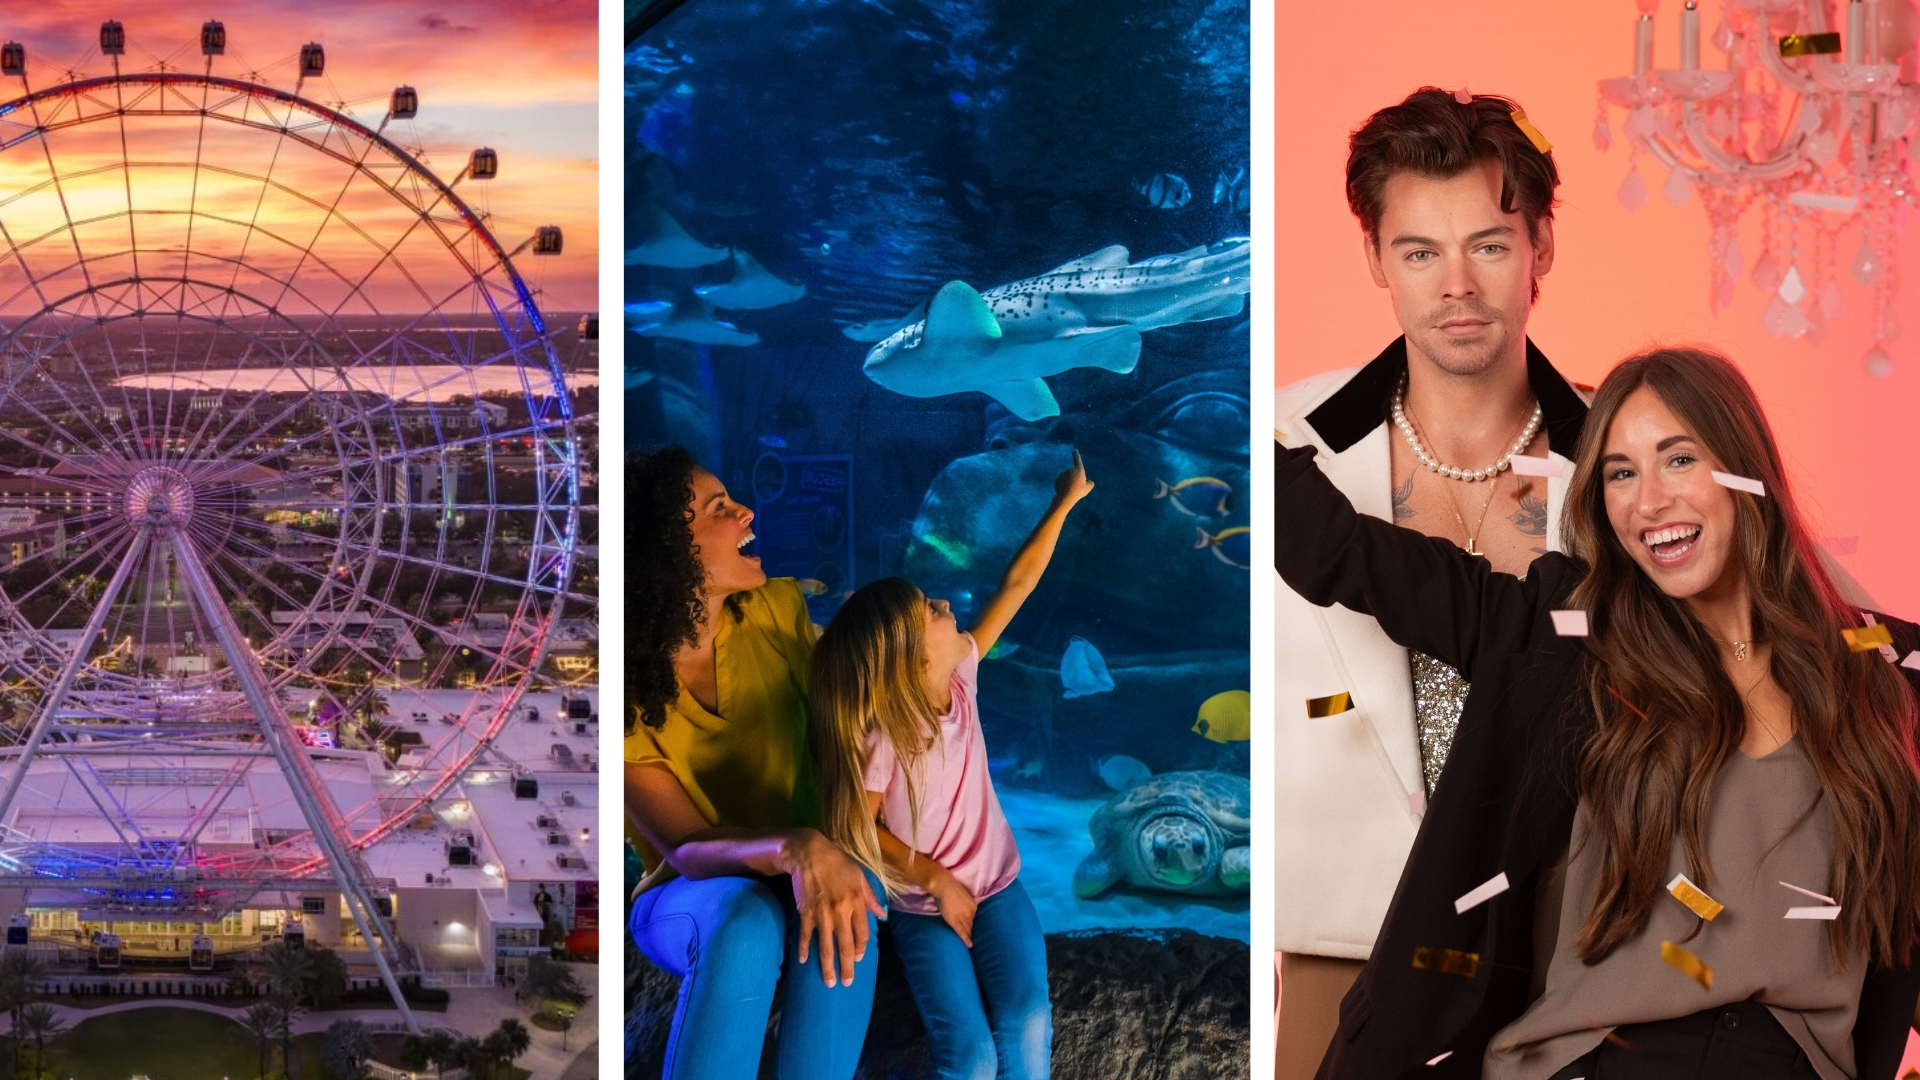 High-angle view of The Orlando Eye ferris wheel against a vibrant orange and pink sunset backdrop with a serene lake. Center image shows a woman with curly hair smiling beside a young girl with long blond hair pointing at a zebra shark in the Indian Ocean habitat at SEA LIFE Orlando Aquarium. The third image, separated by a white divider, features a woman with long brown hair posing with a Harry Styles wax statue as confetti falls around her in Madame Tussauds Orlando.